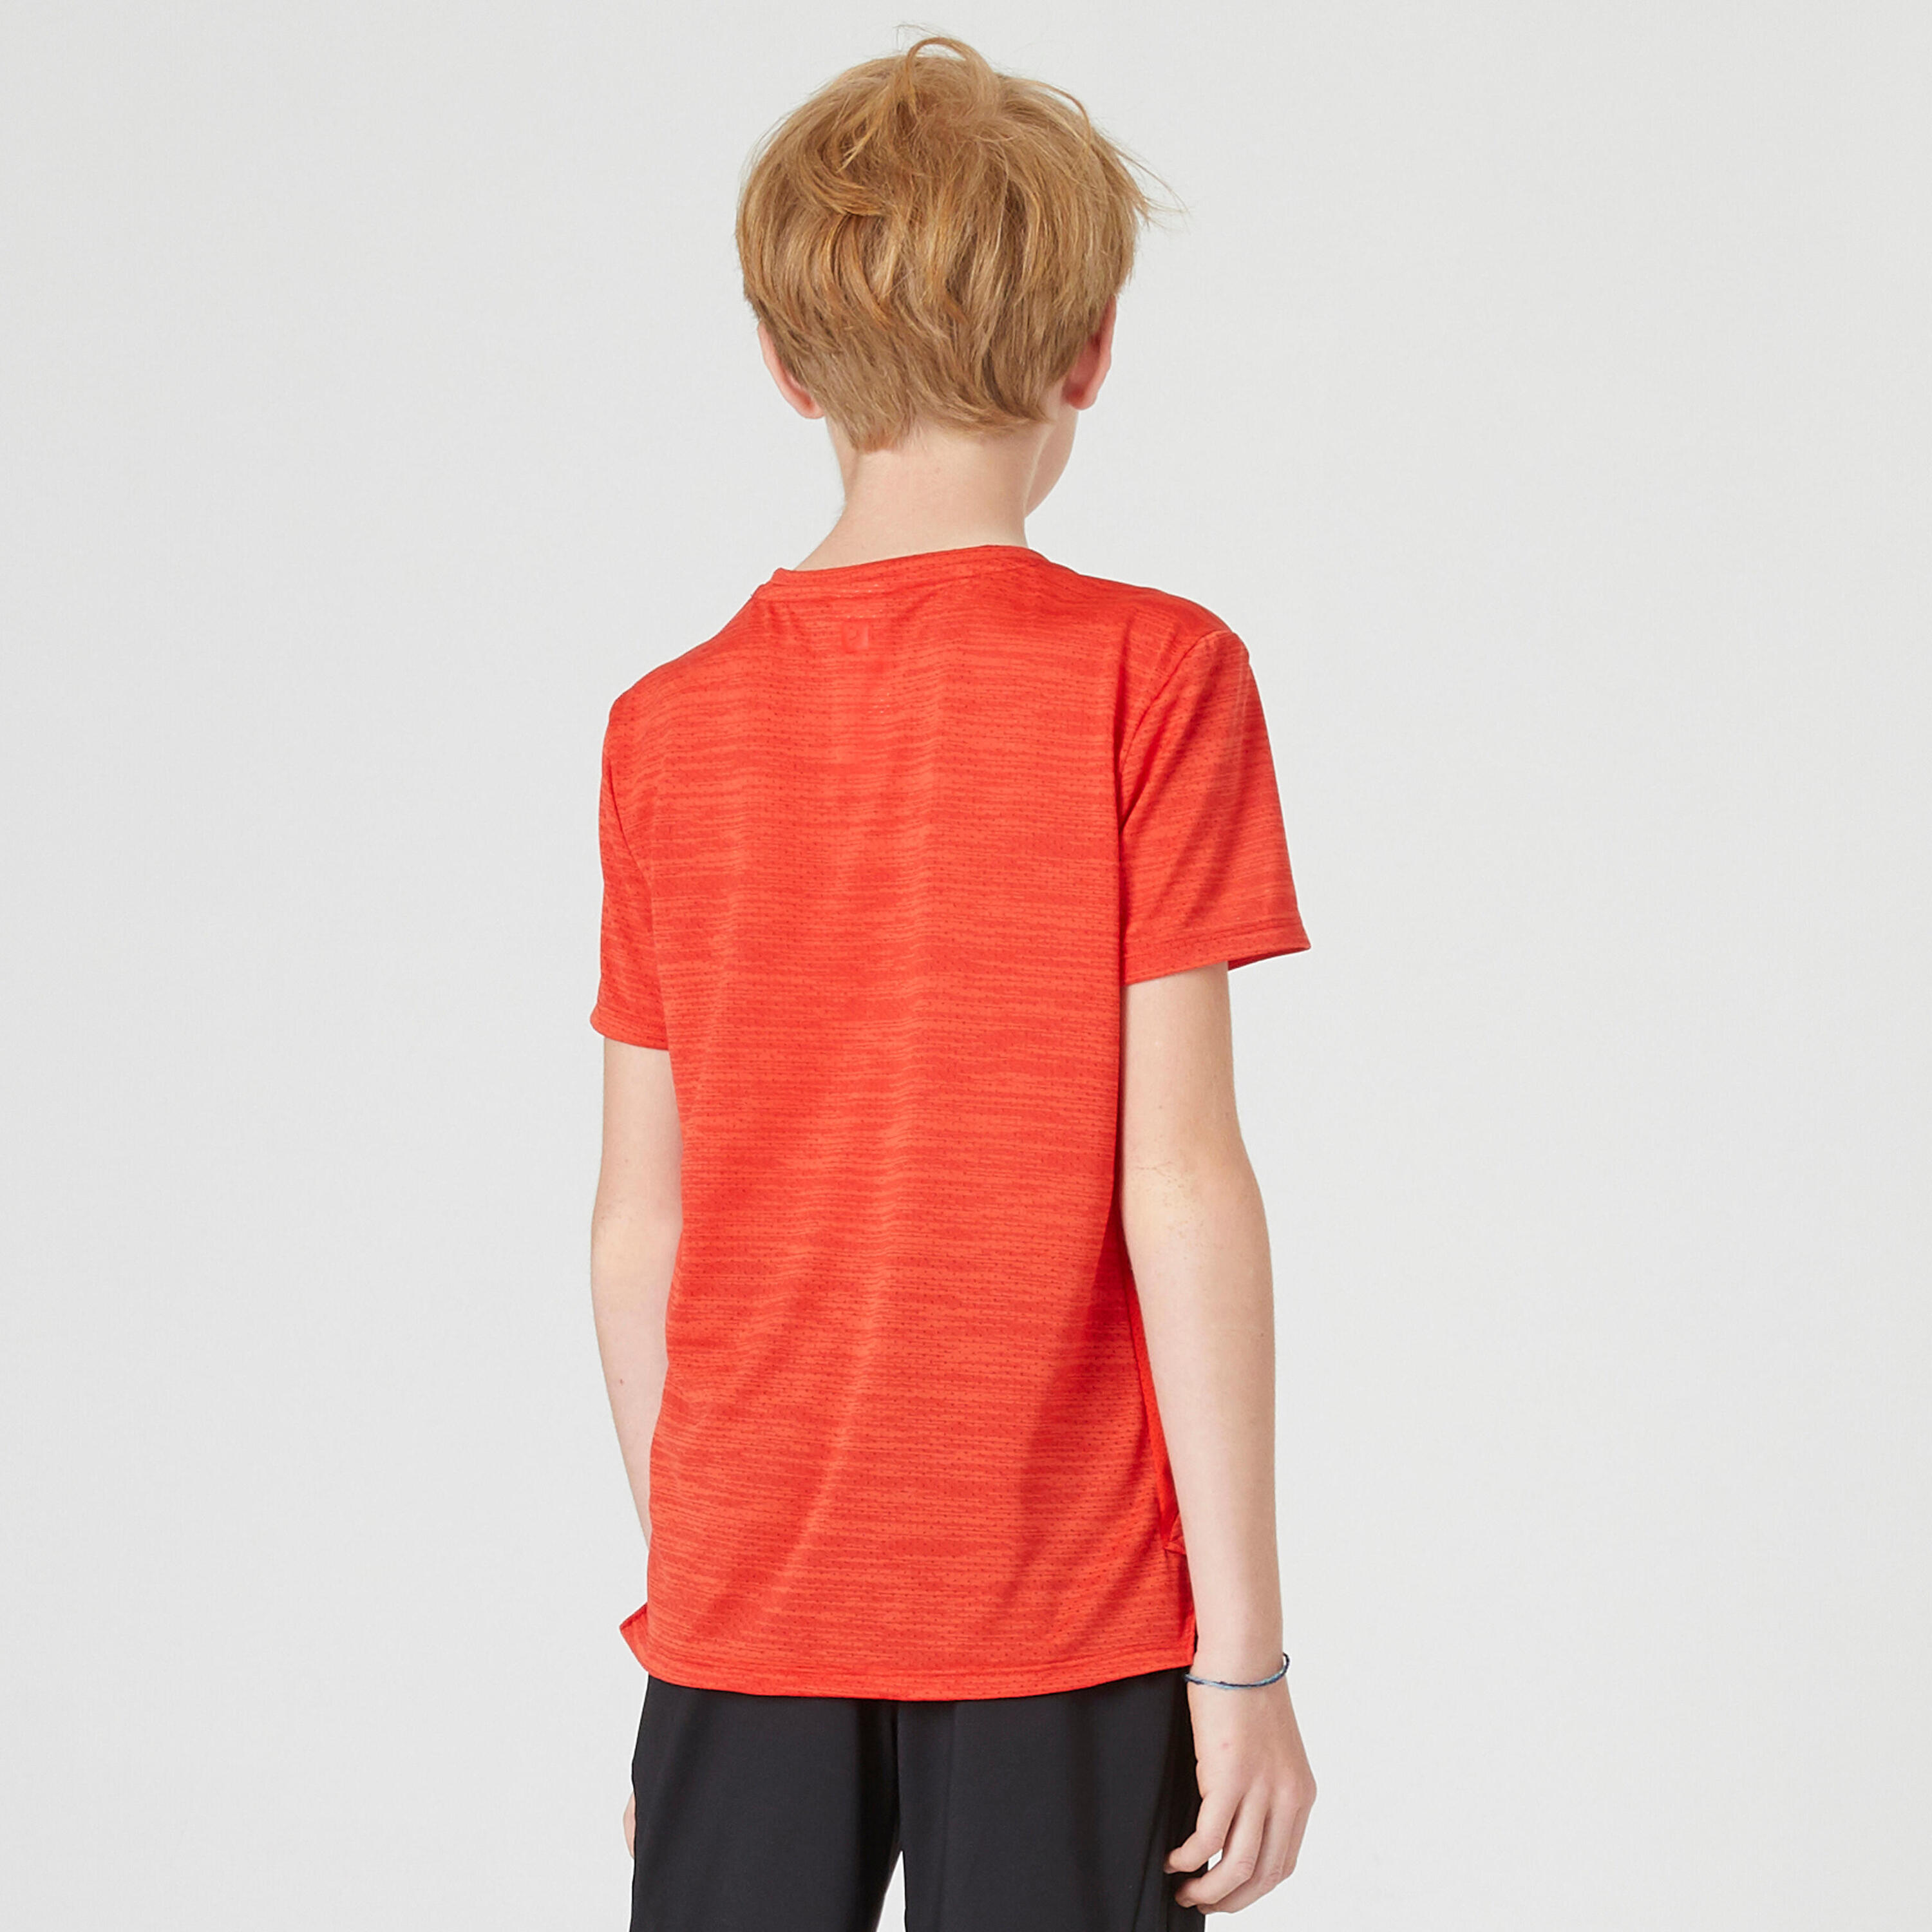 Kids' Synthetic Breathable T-Shirt S500 - Red 4/6